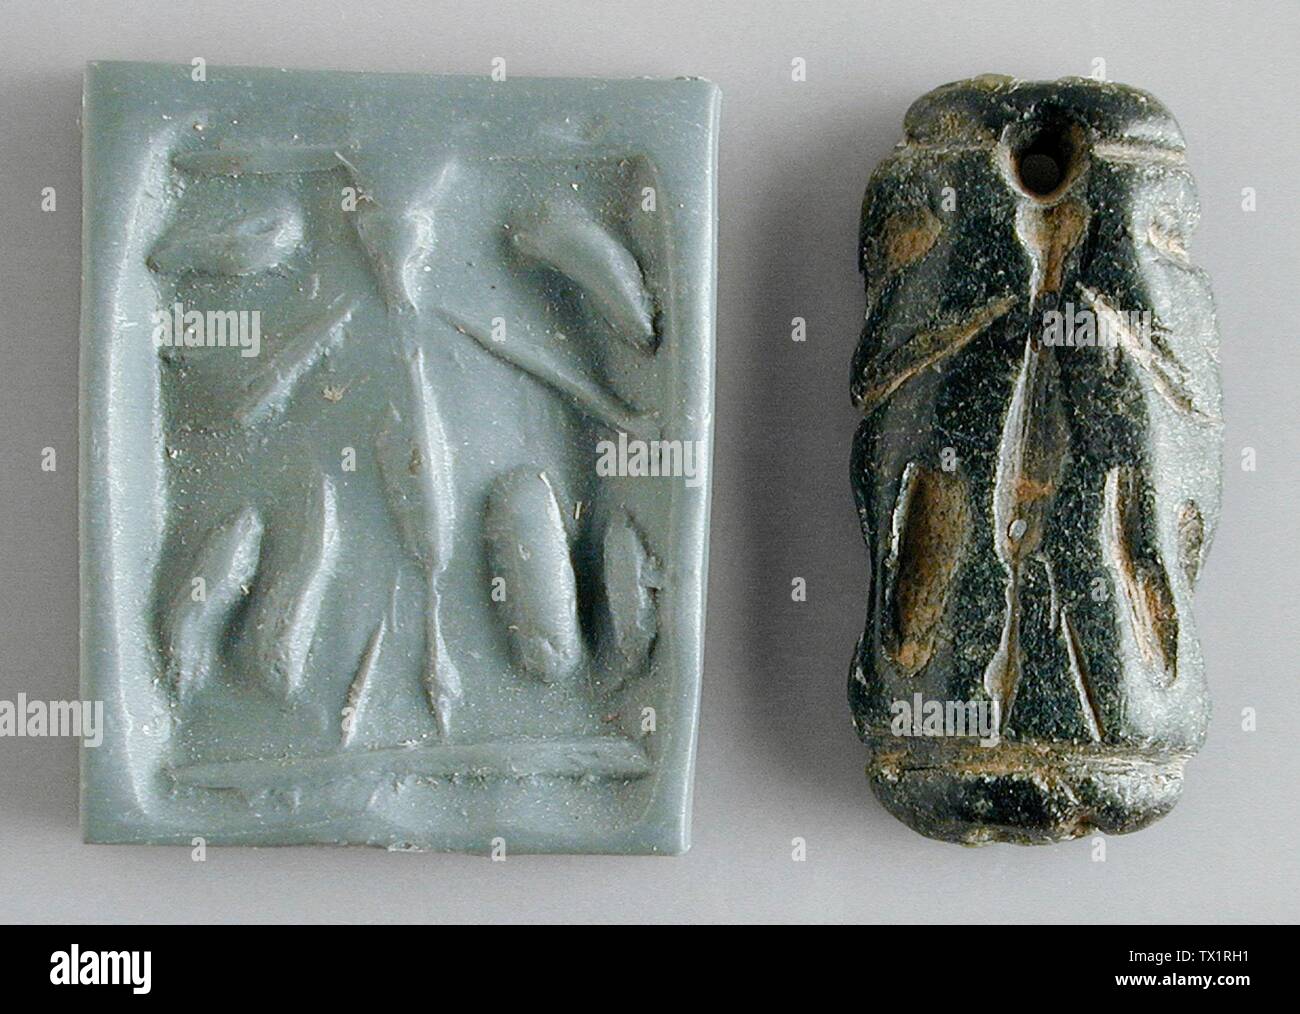 Cylinder Seal; Iran, Mesopotamia or Syria, Transitional period, about 2900-2800 B.C.  Tools and Equipment; seals Black serpentine Height:  1 9/16 in. (3.9 cm); Diameter:  13/16 in. (2 cm) Gift of Nasli M. Heeramaneck (M.76.174.334) Art of the Ancient Near East; between circa 2900 and circa 2800 date QS:P571,+2500-00-00T00:00:00Z/6,P1319,+2900-00-00T00:00:00Z/9,P1326,+2800-00-00T00:00:00Z/9,P1480,Q5727902 B.C.; Stock Photo